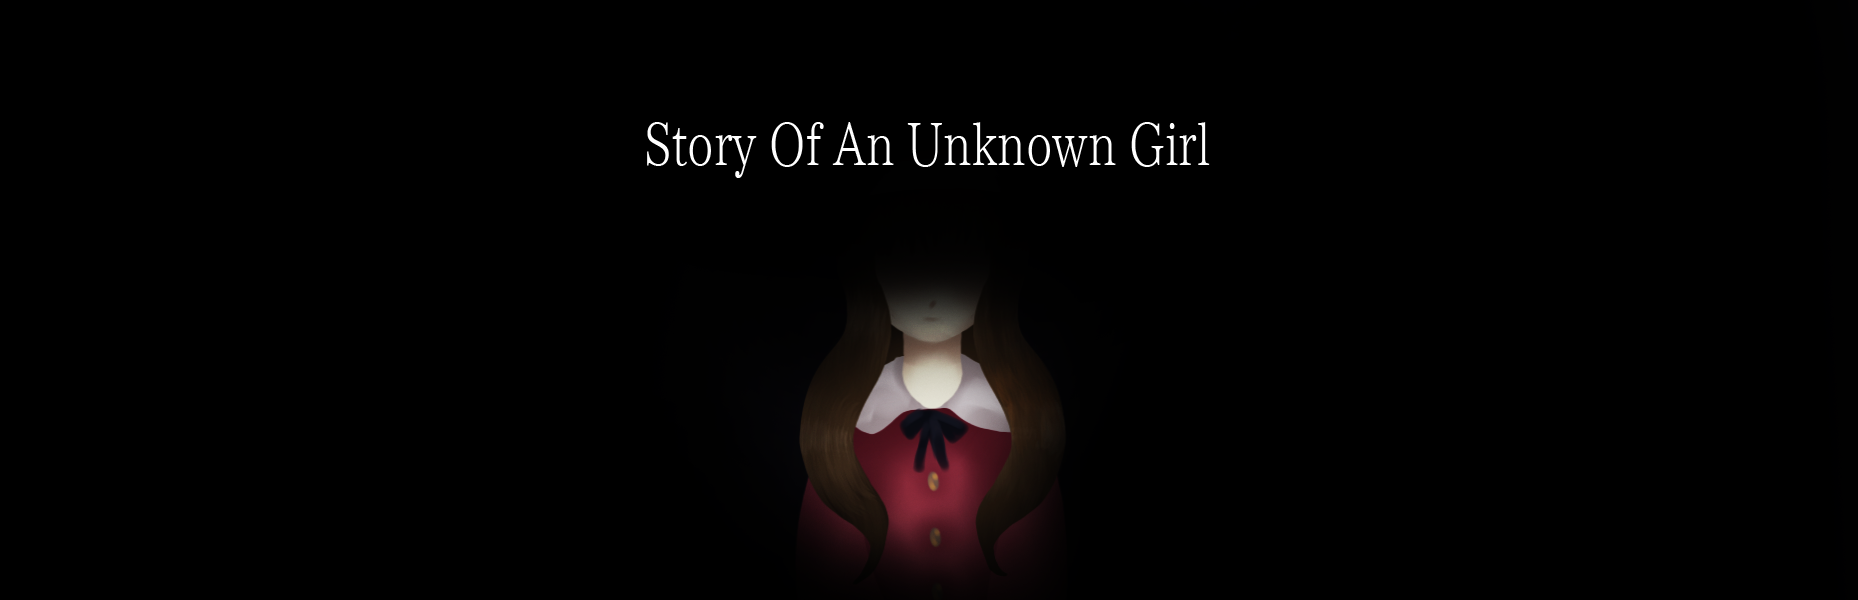 Story Of An Unknown Girl